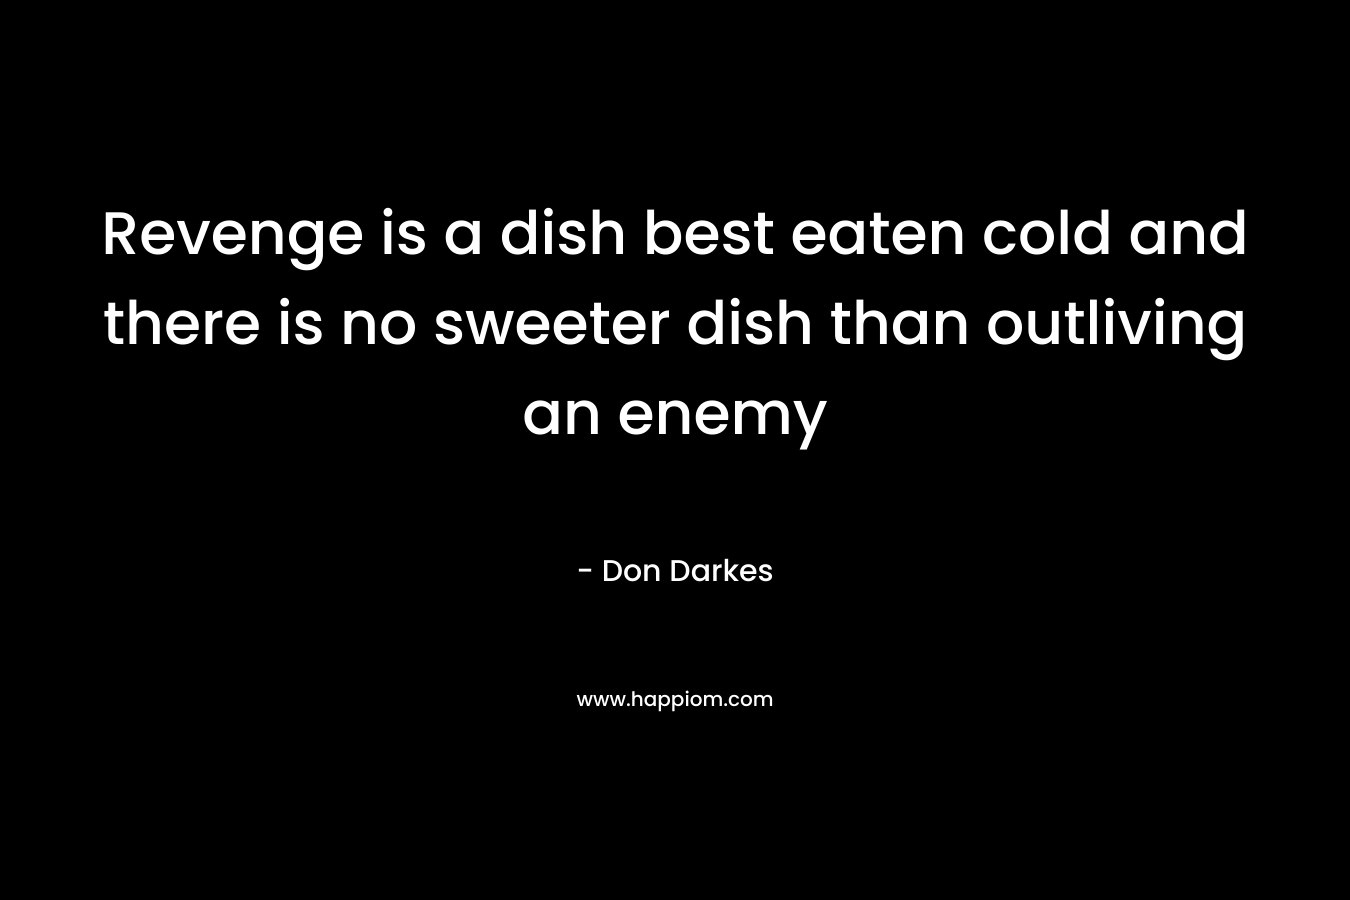 Revenge is a dish best eaten cold and there is no sweeter dish than outliving an enemy – Don Darkes